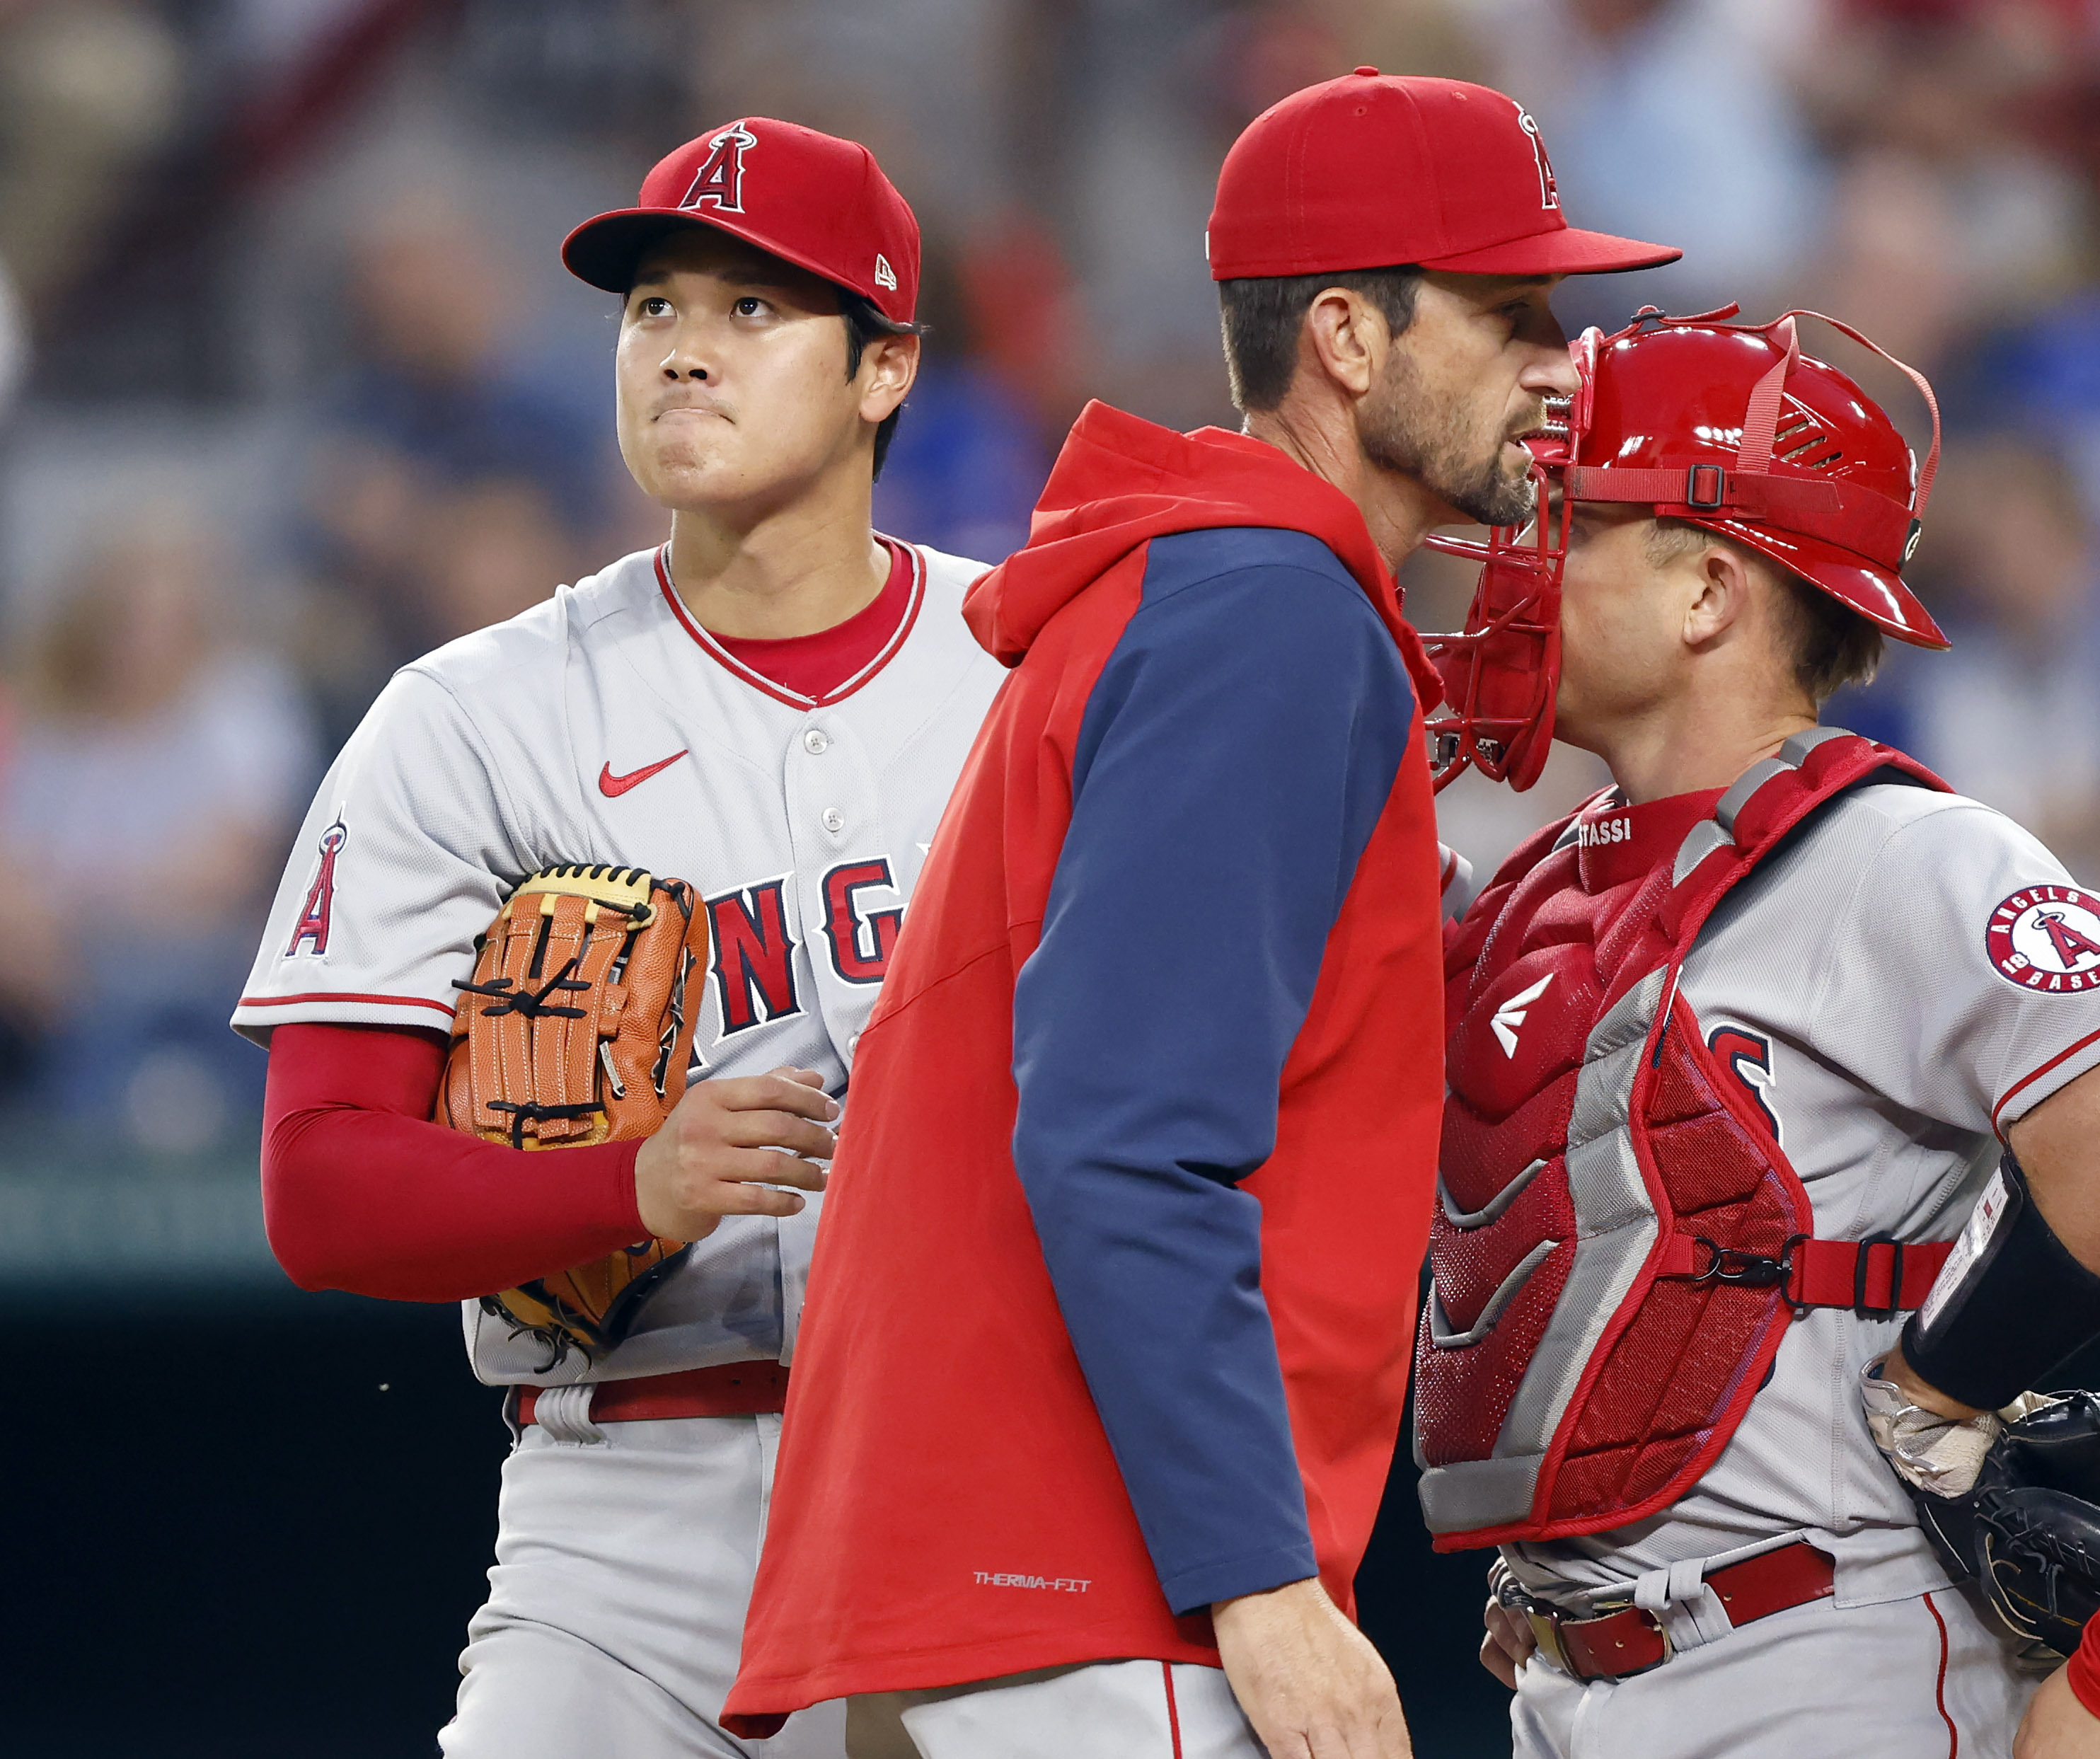 Shohei Ohtani of Los Angeles Angels says no decision on Tommy John